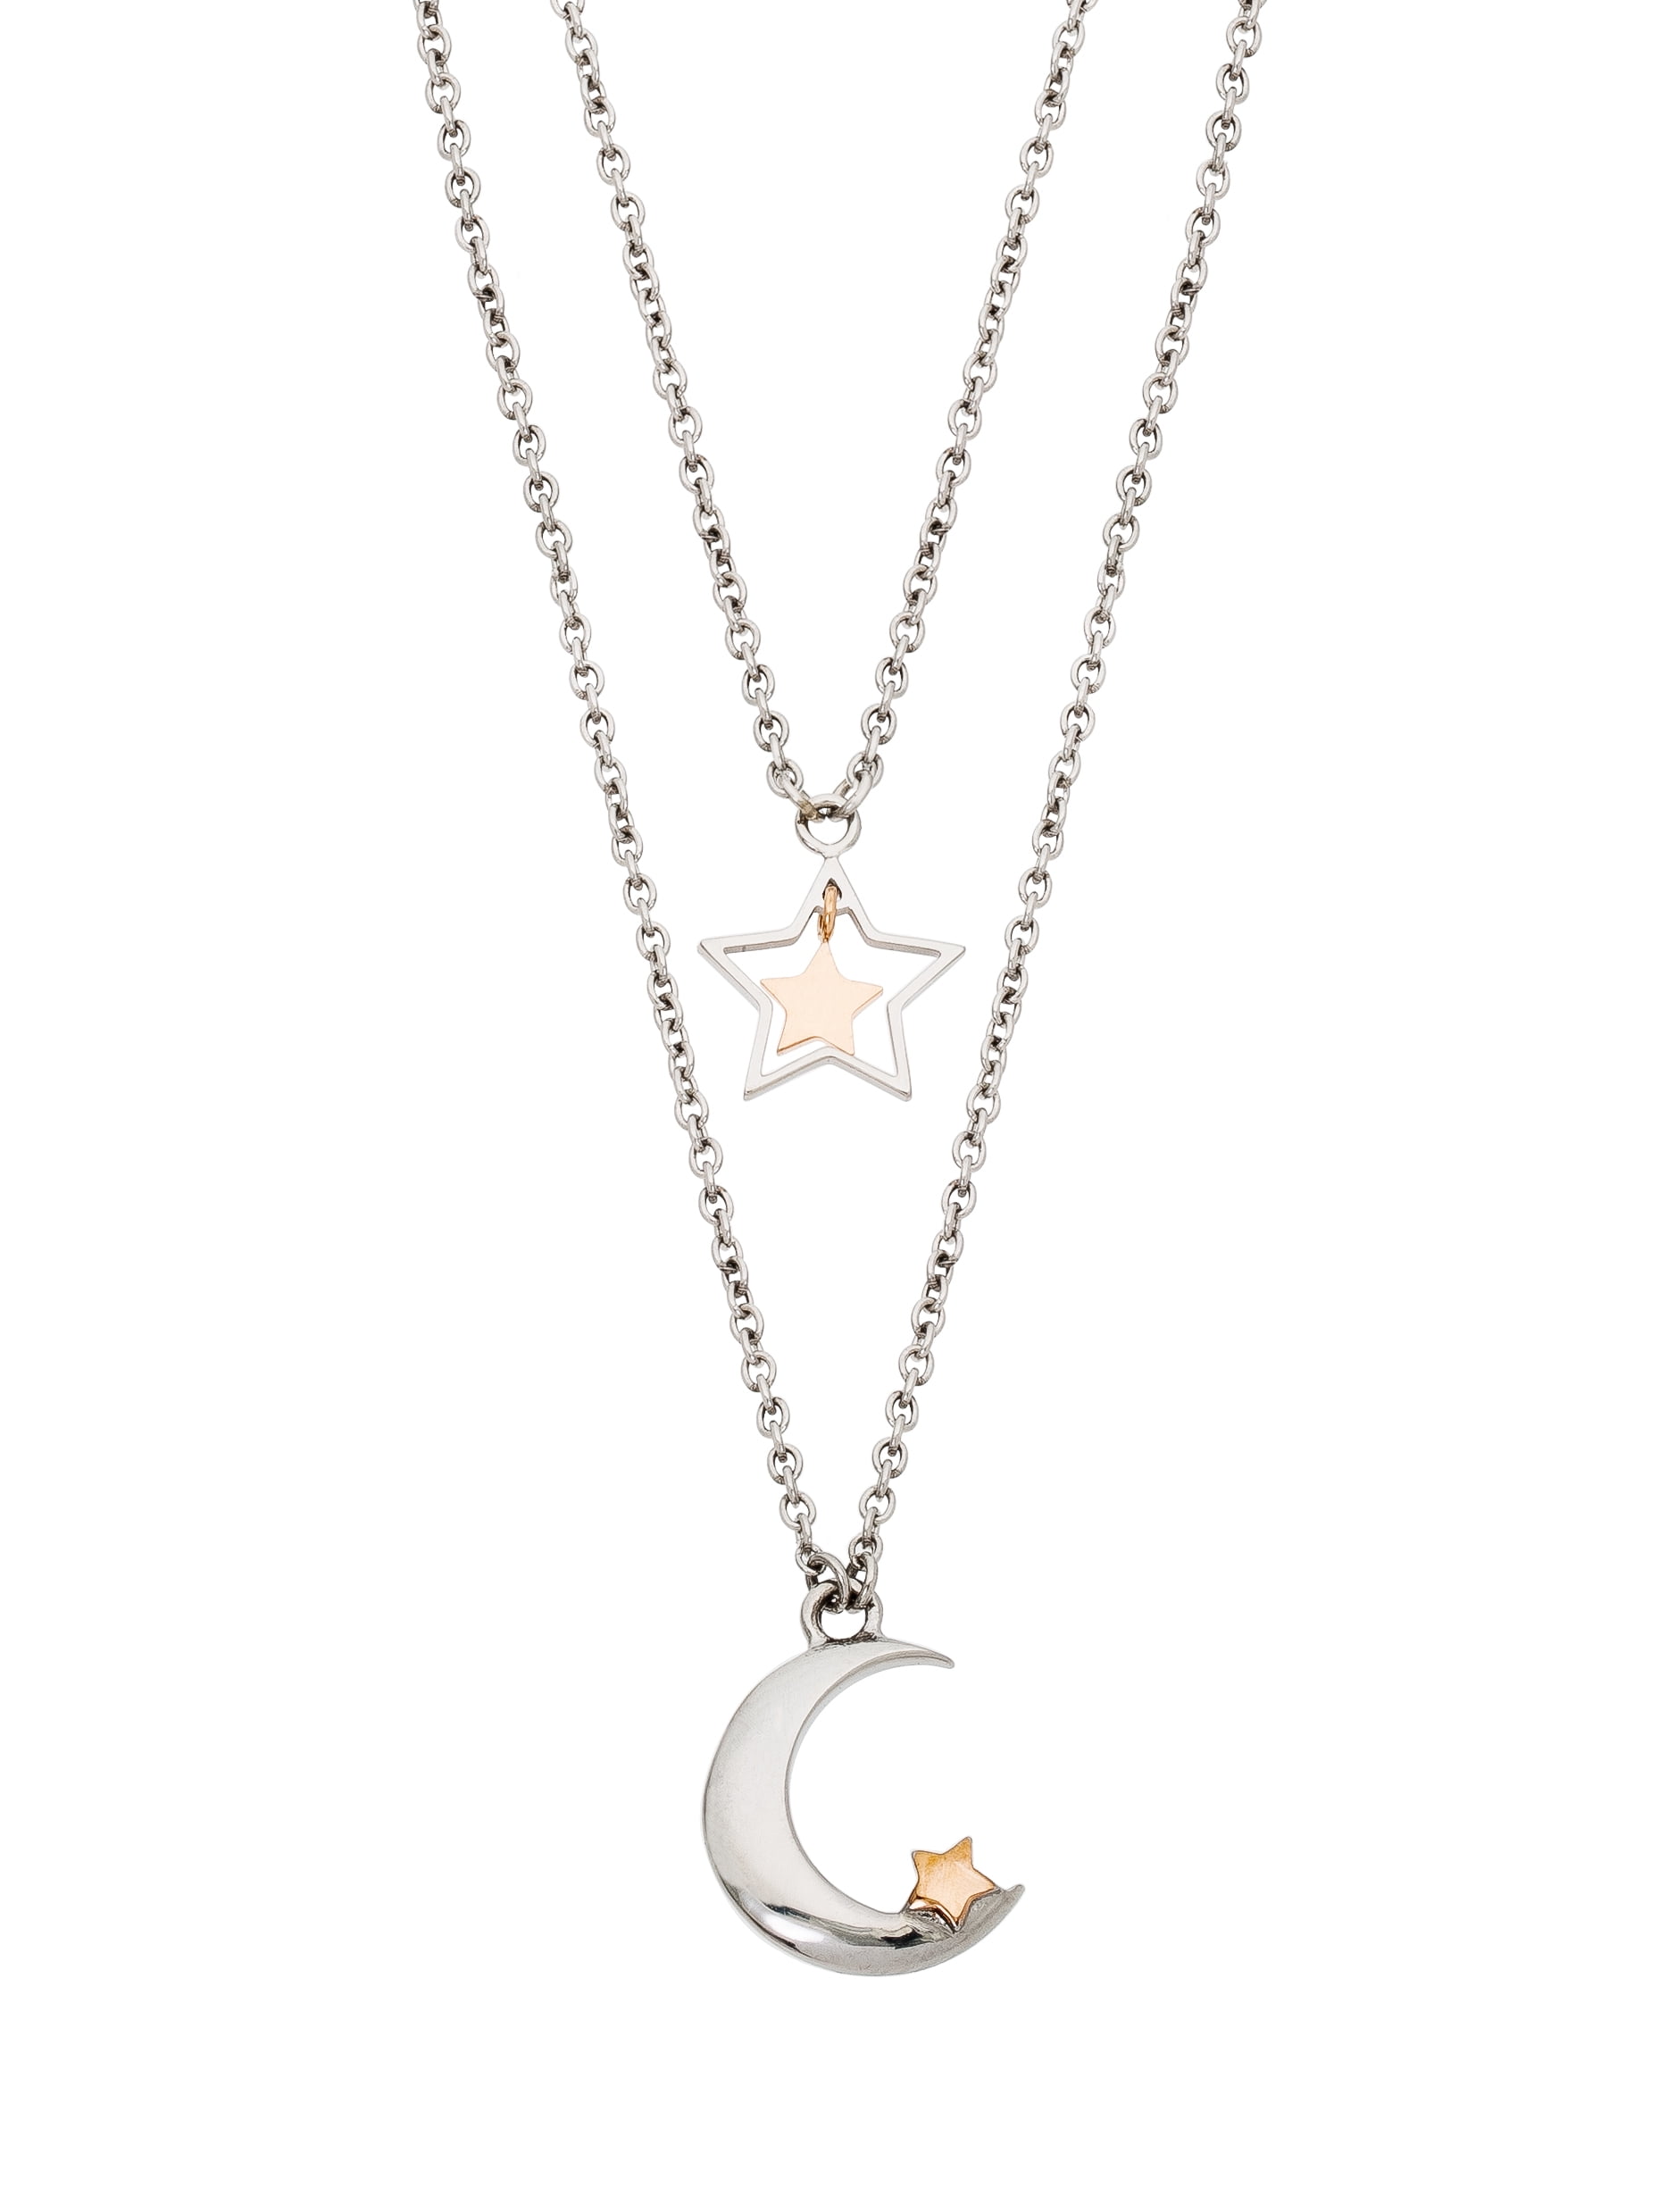 Connections from Hallmark Stainless Steel Moon & Stars Layered Necklace ...